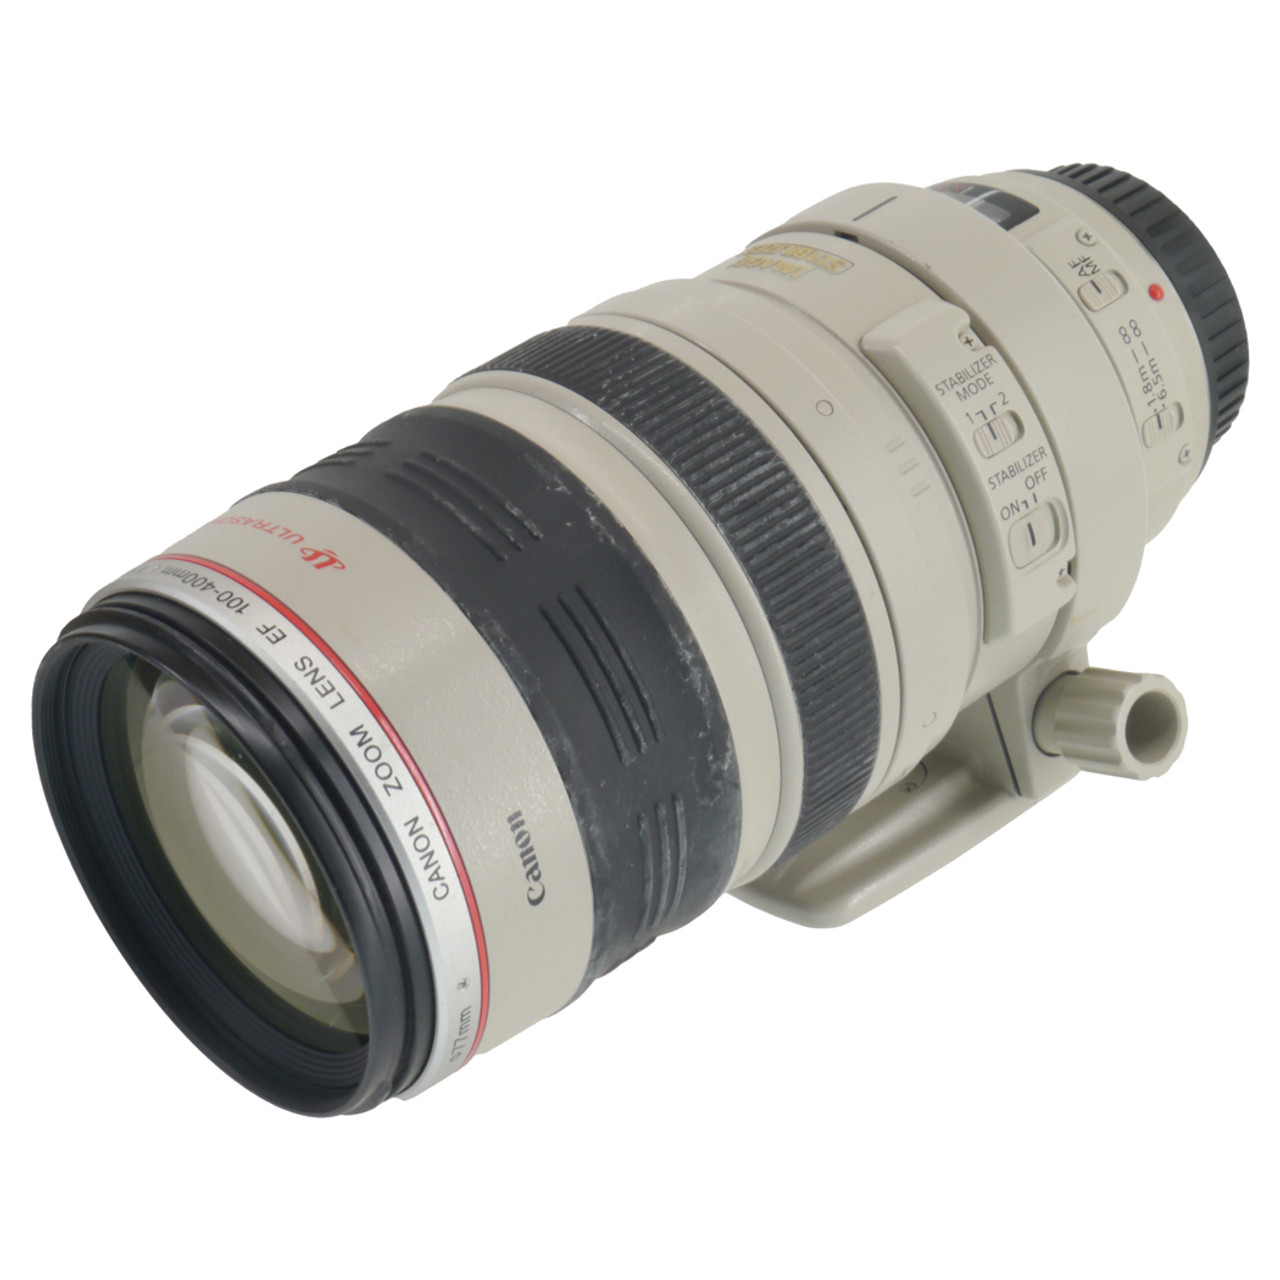 USED CANON EF 100-400MM F4.5-5.6 L IS (763448)